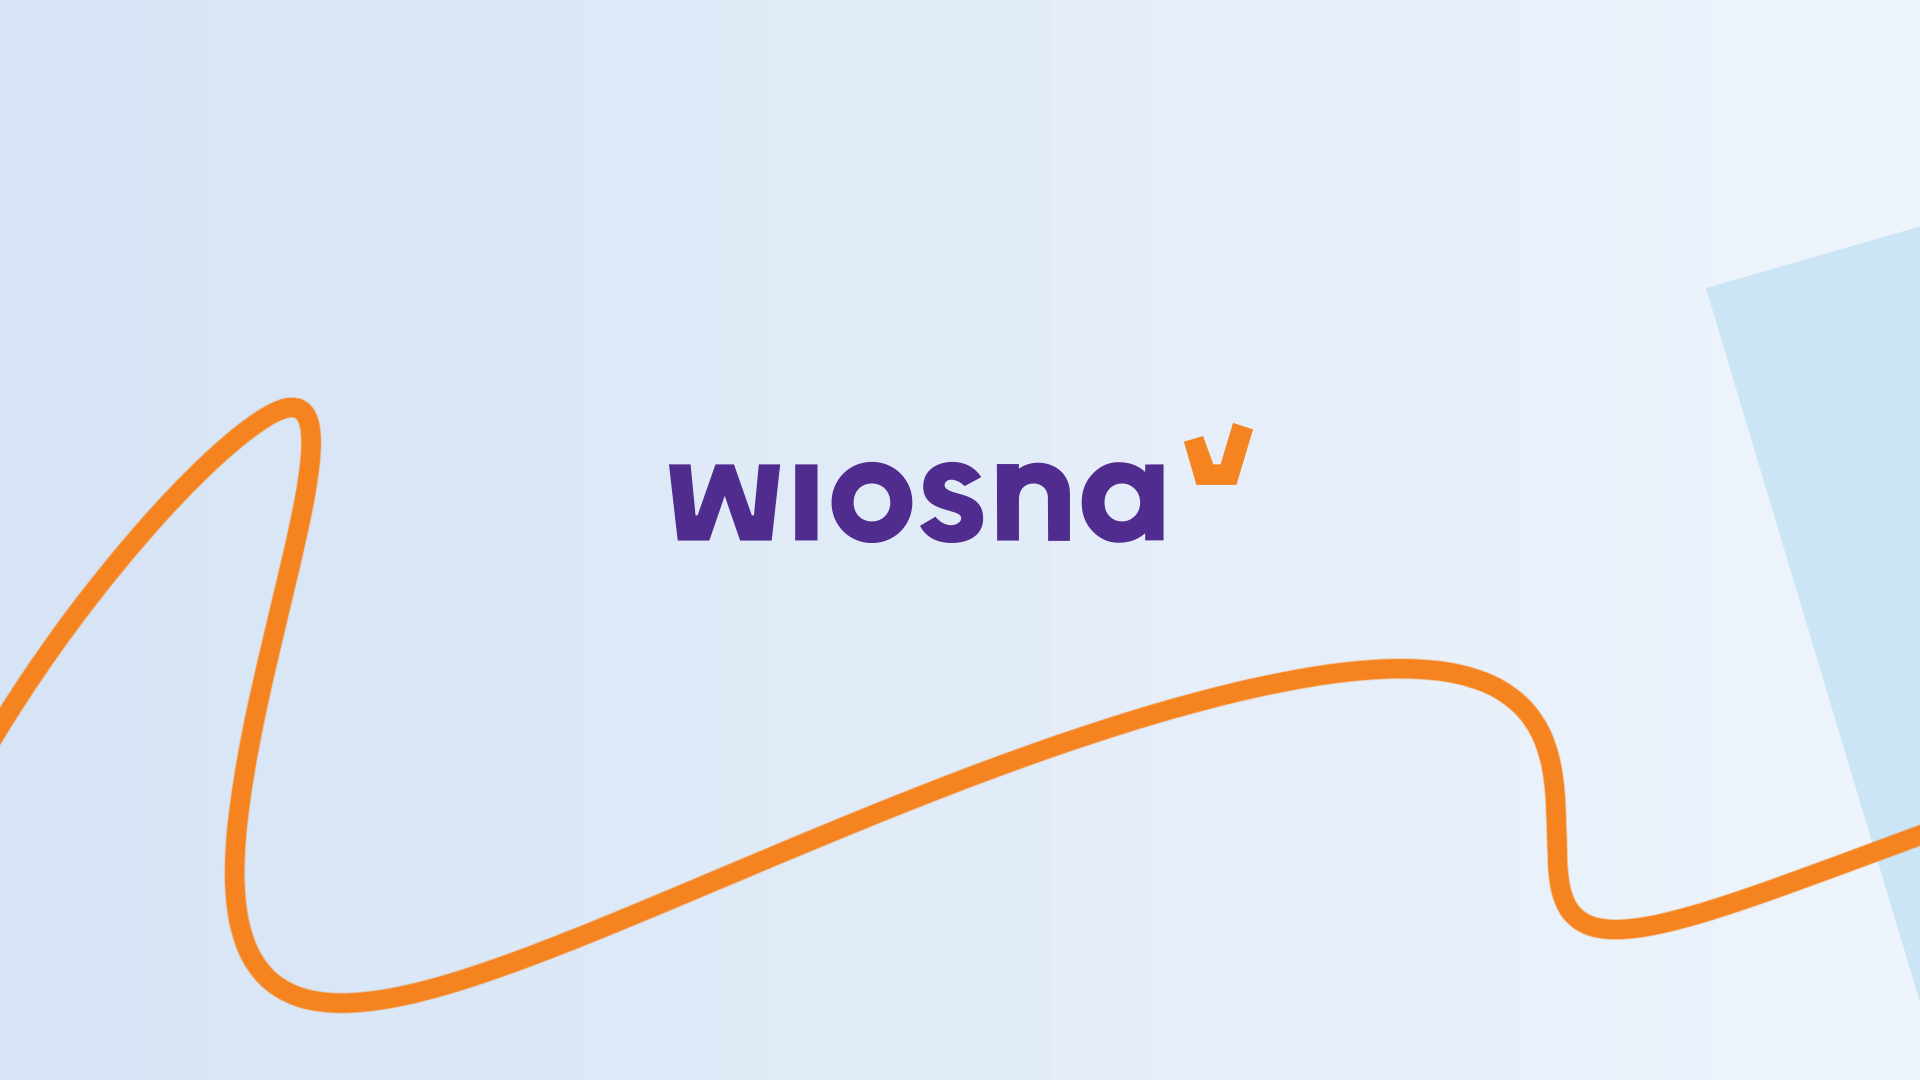 001 wiosna.png